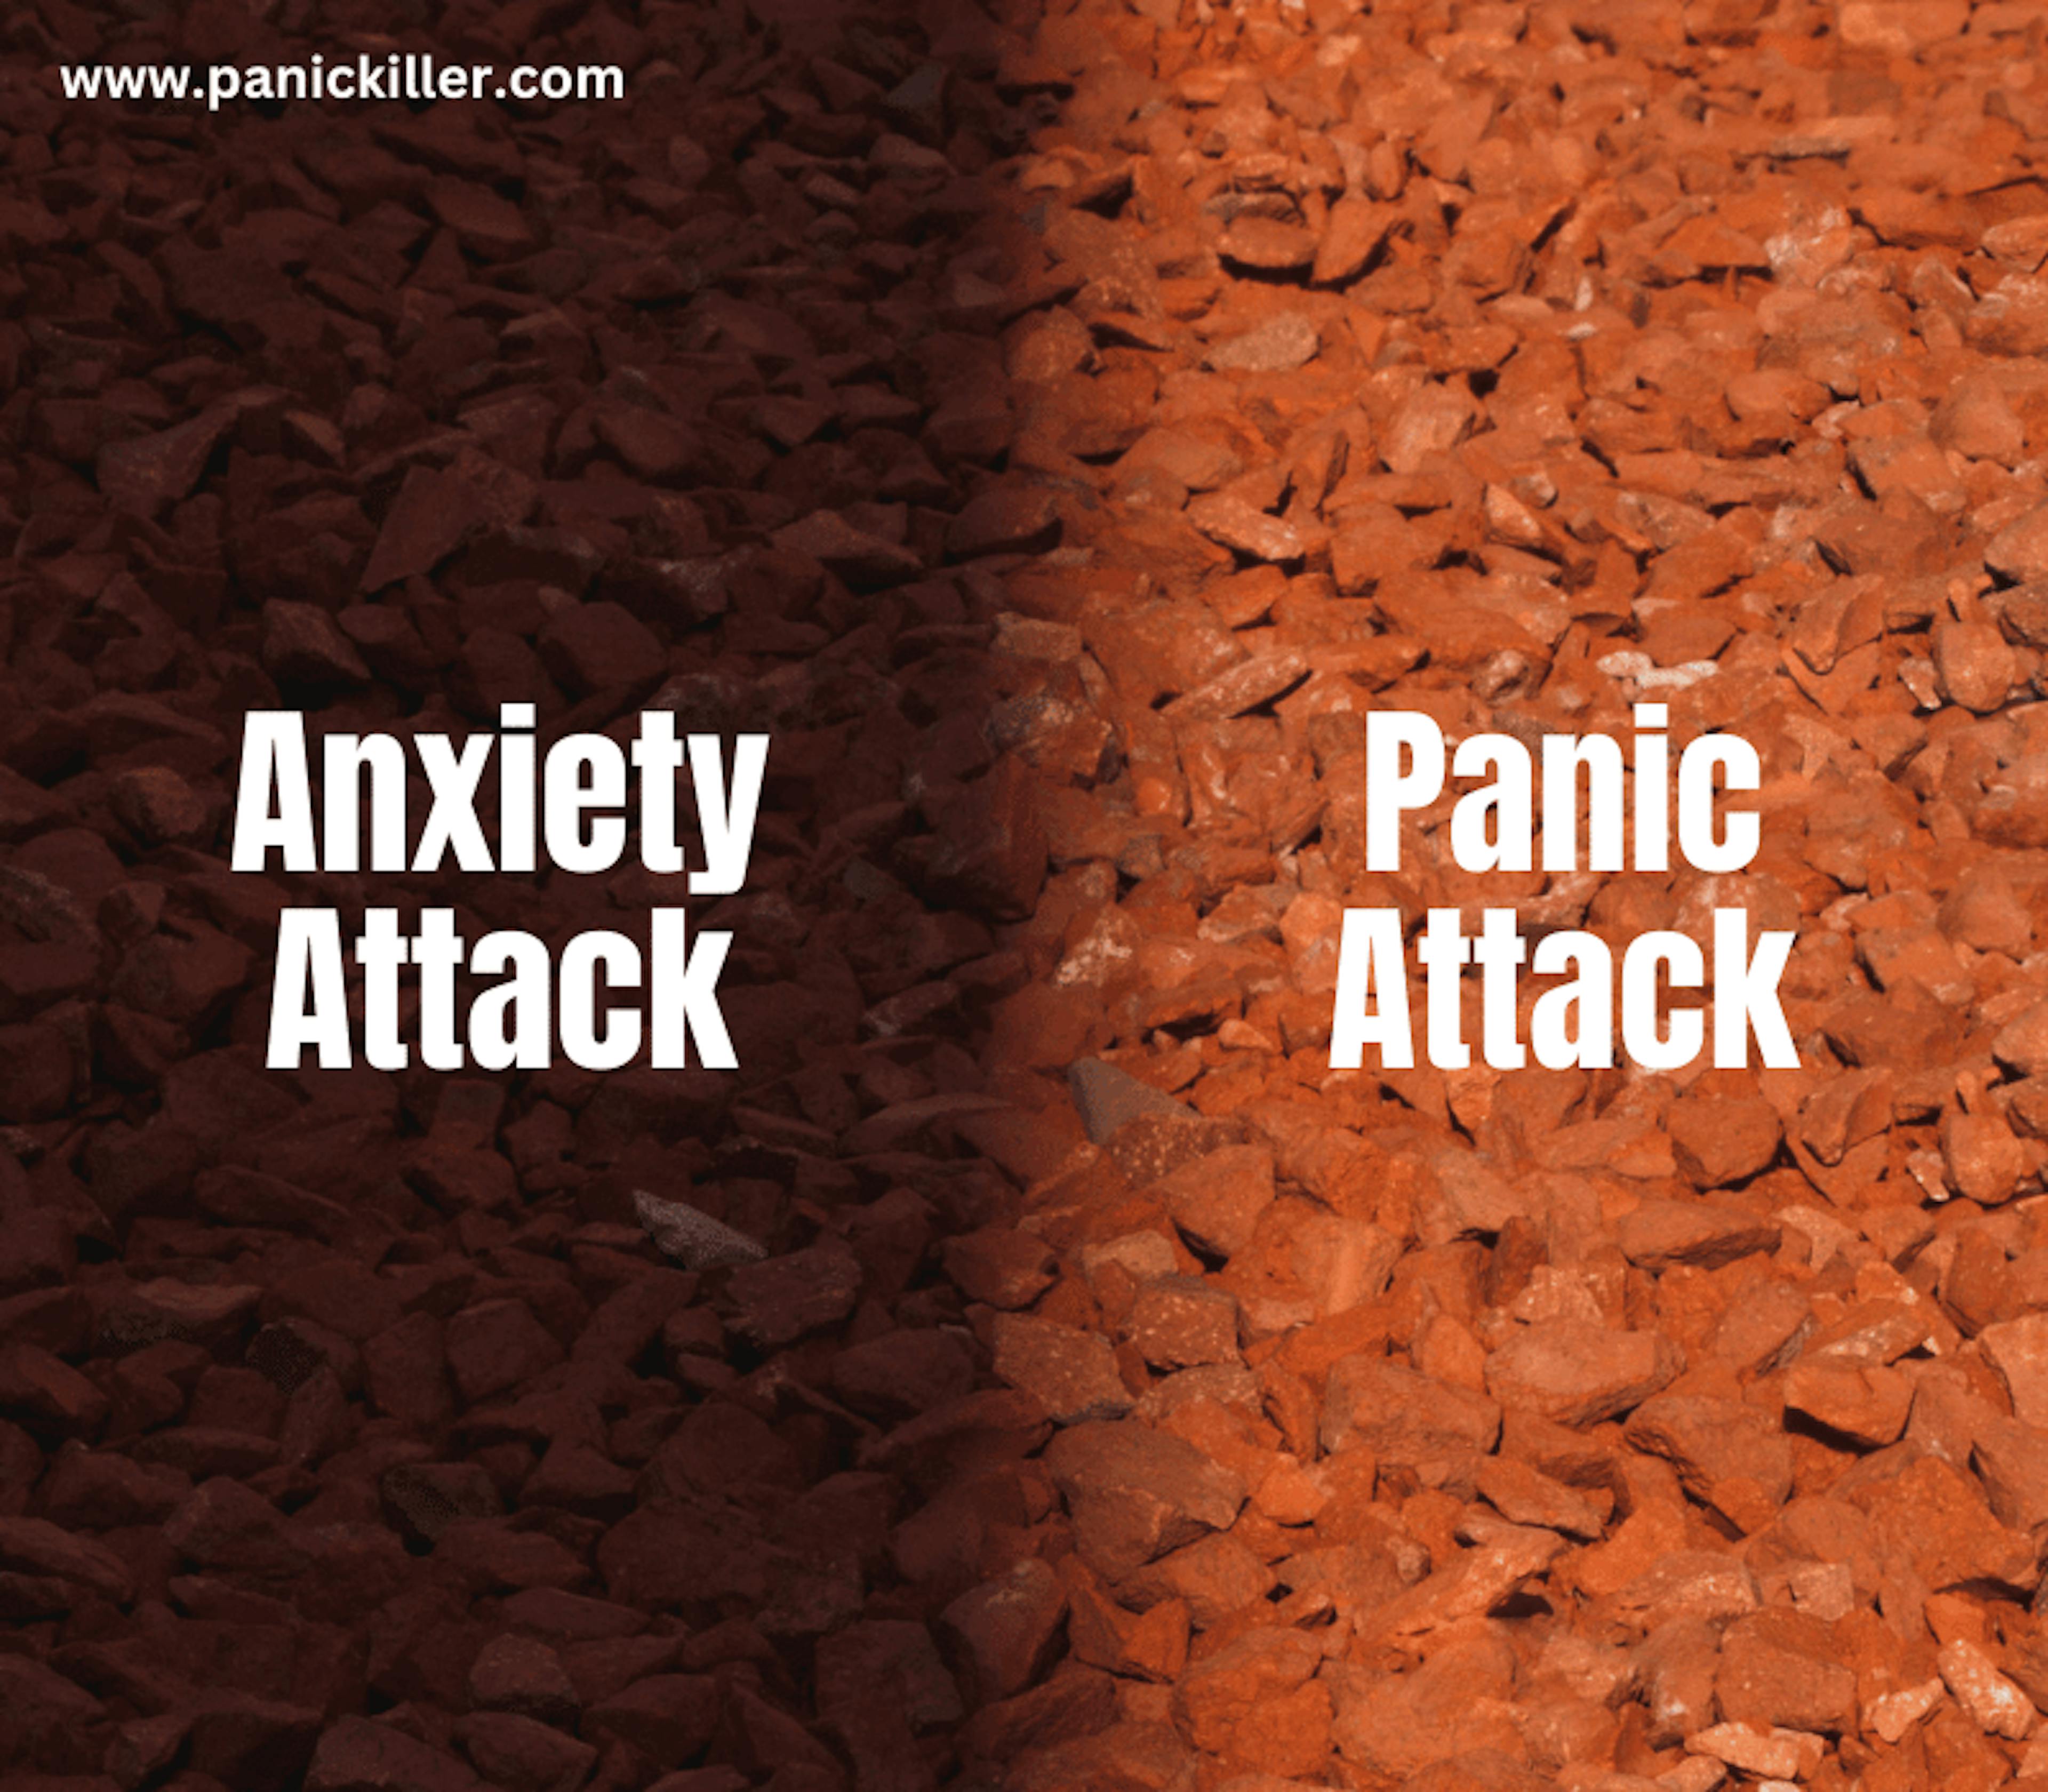 Panic attack and anxiety attack comparison